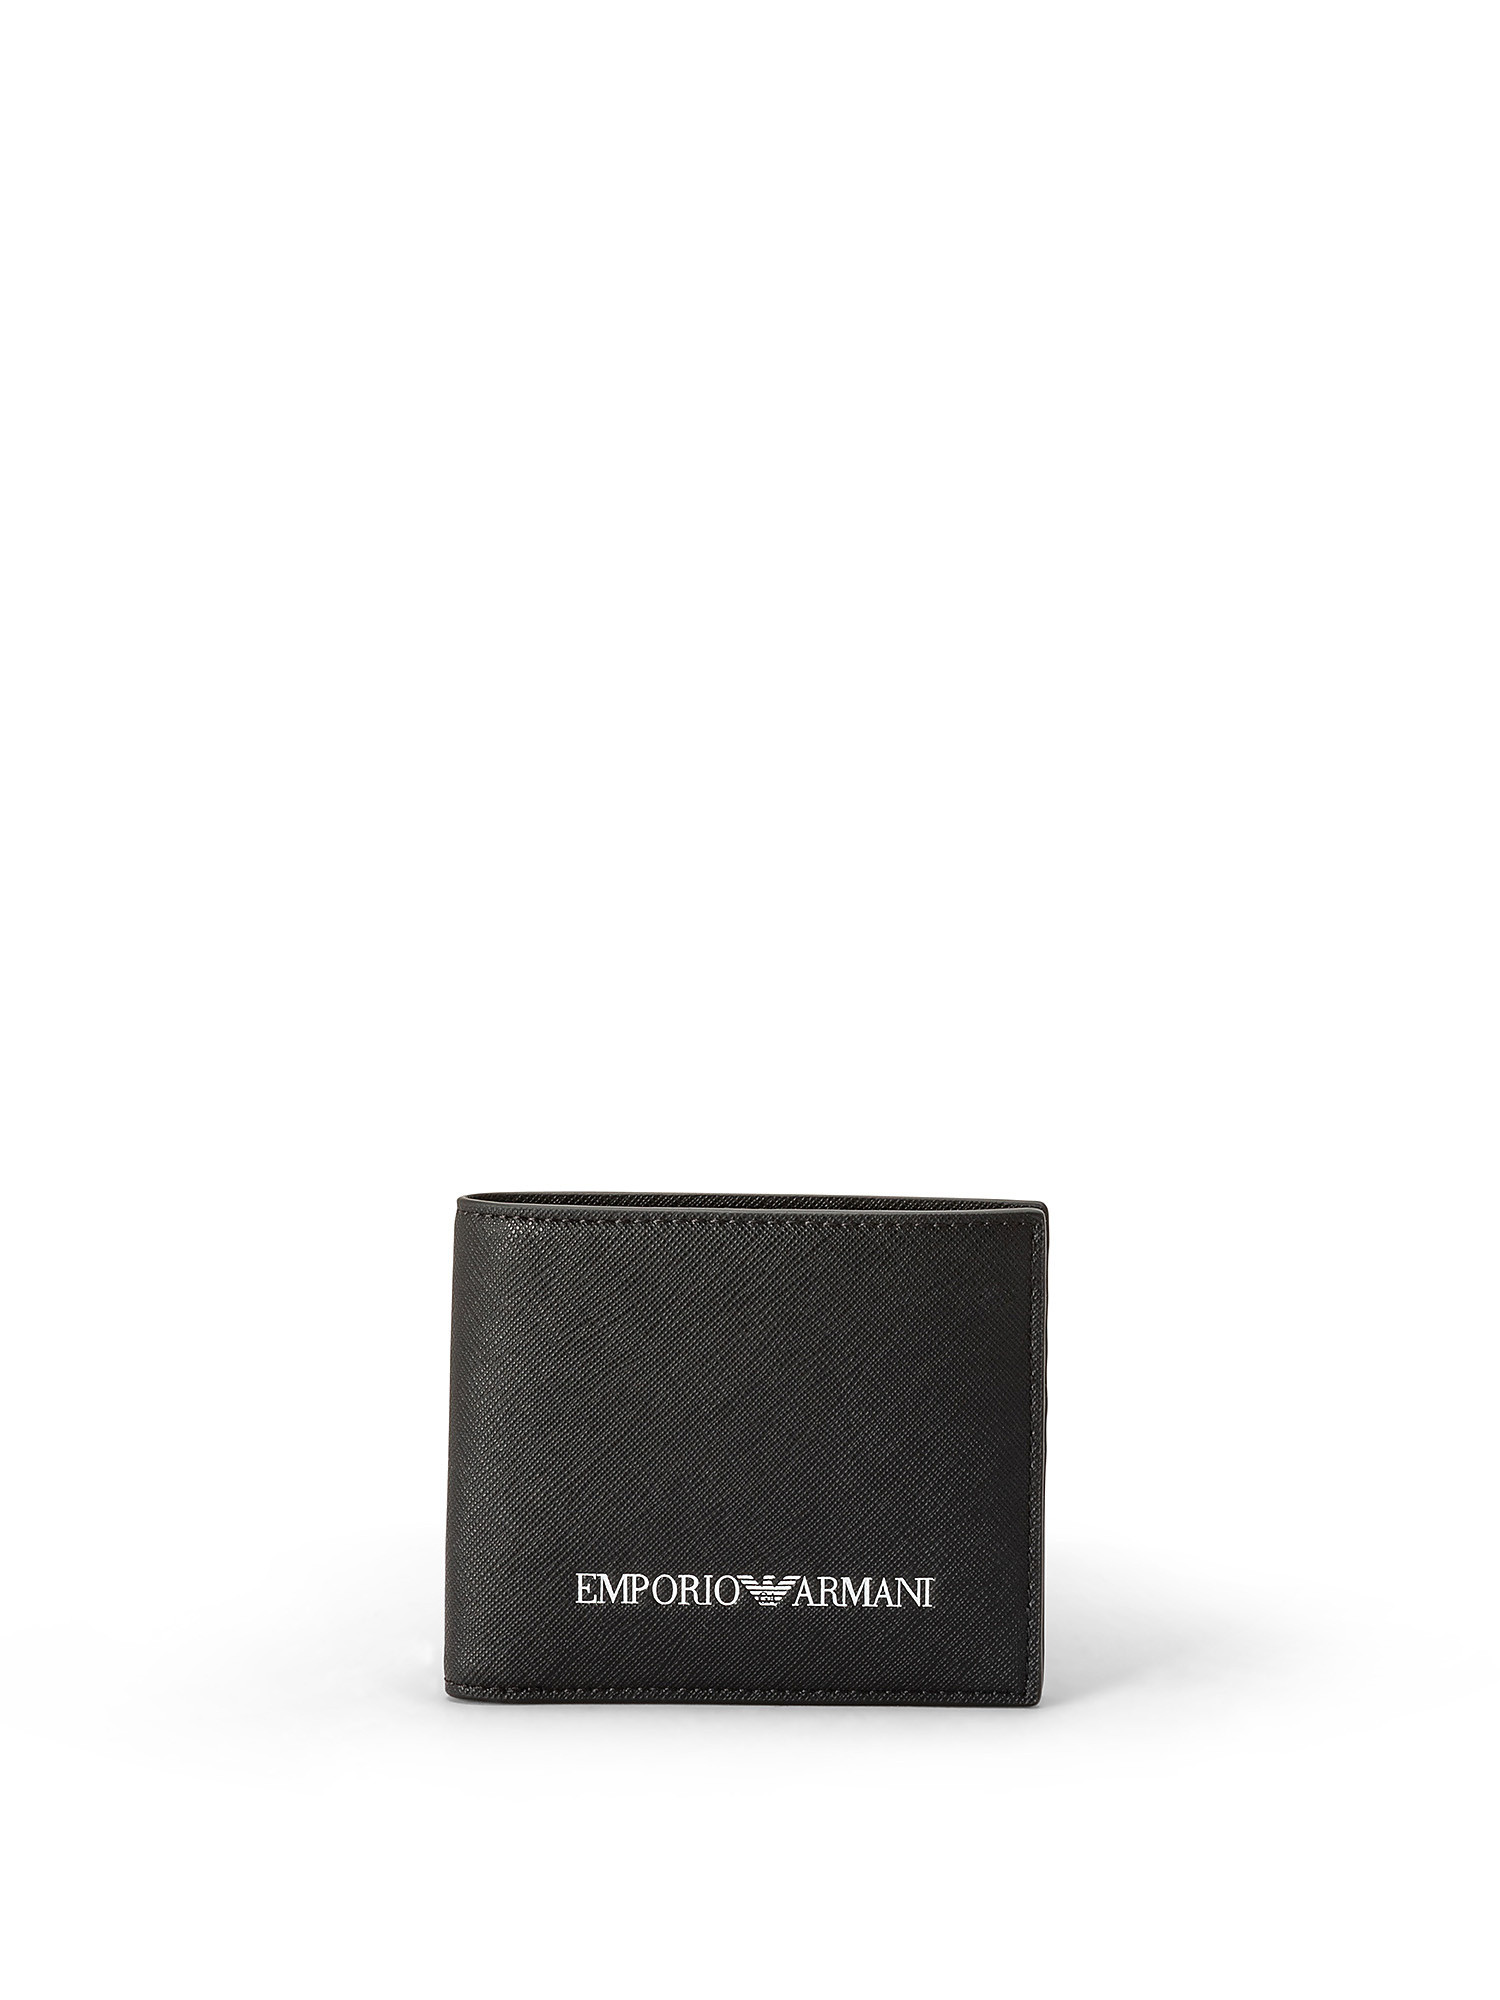 Emporio Armani - Saffiano print regenerated leather wallet, Black, large image number 0